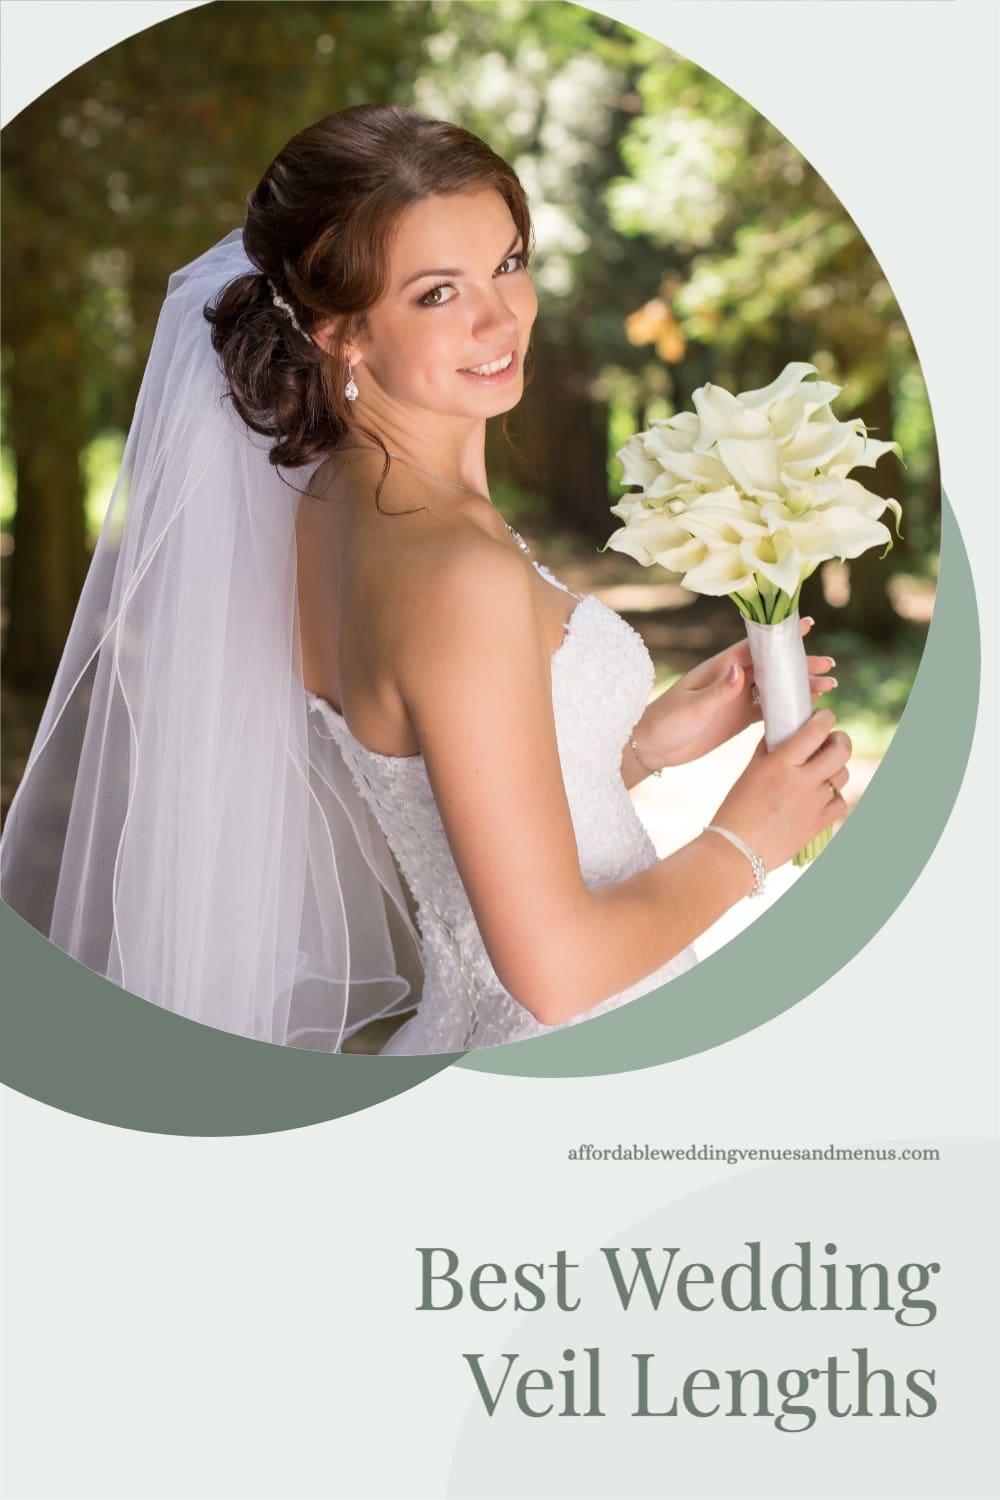 Bridal Veil: How to choose it? Which one to choose? Short Veil or